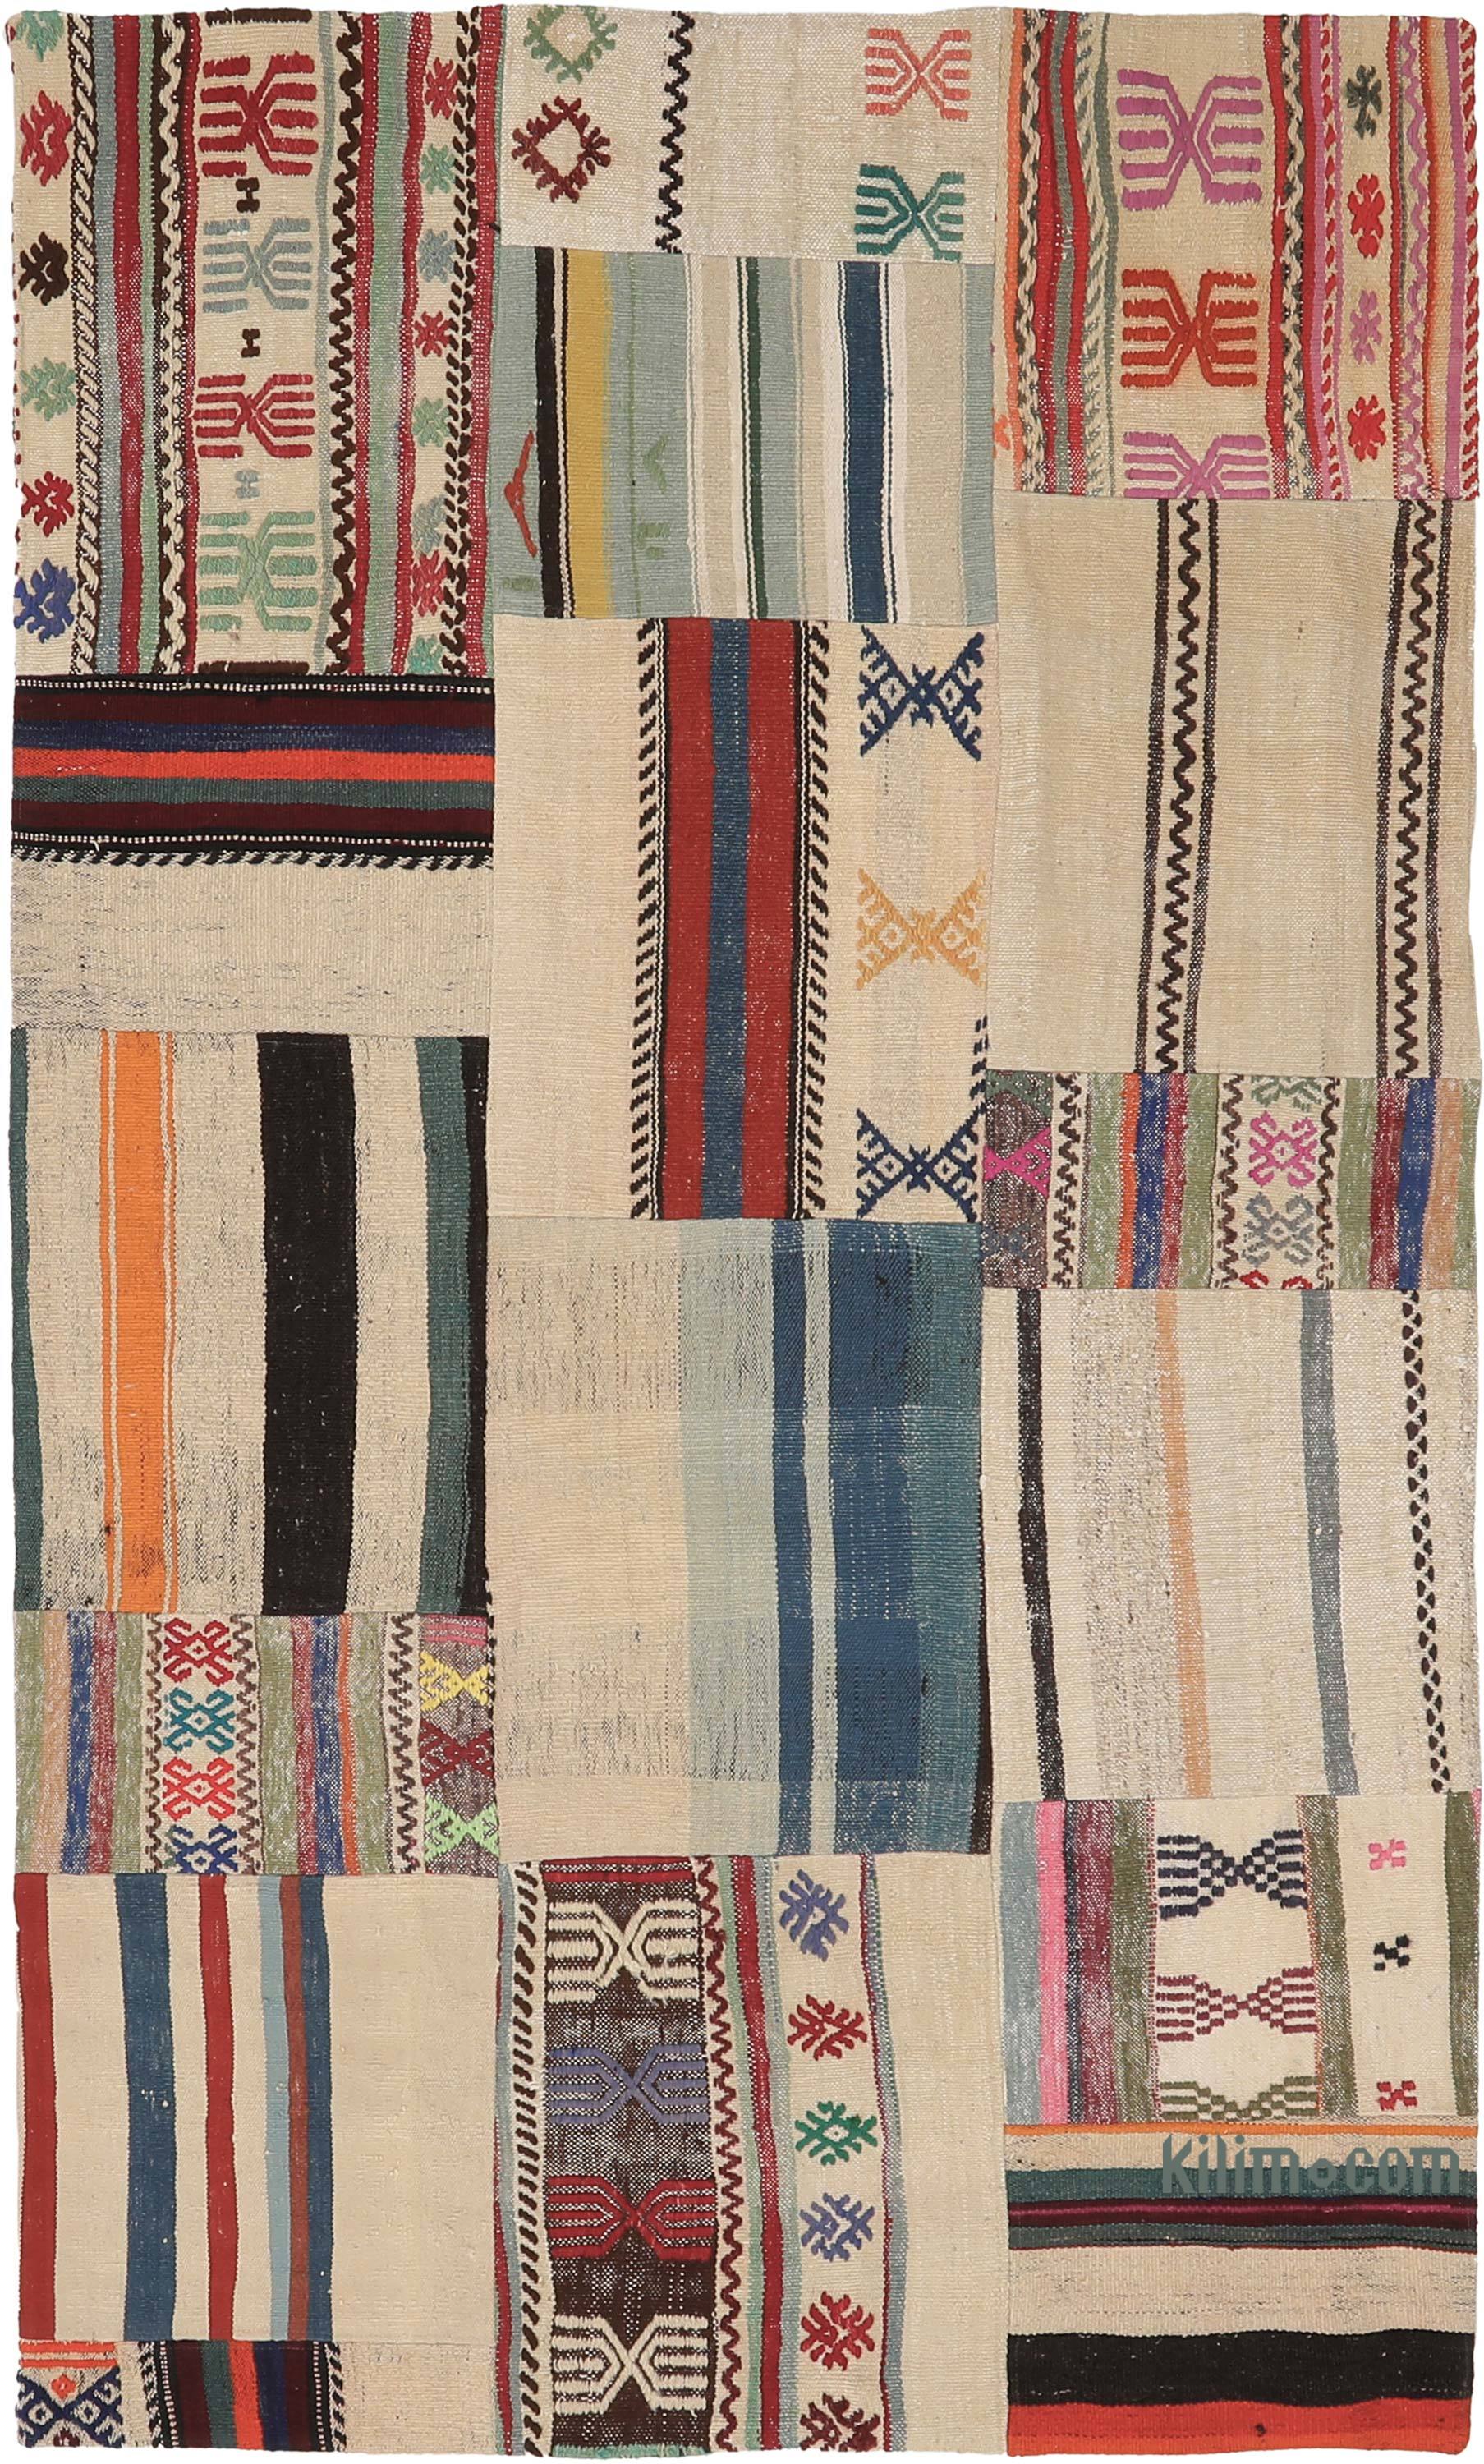 K0065610 Patchwork Kilim Rug - 4' 5" x 7' 7" (53 in. x 91 in.) | The Source for Rugs, Tribal Rugs, Wool Turkish Rugs, Overdyed Runner Rugs,